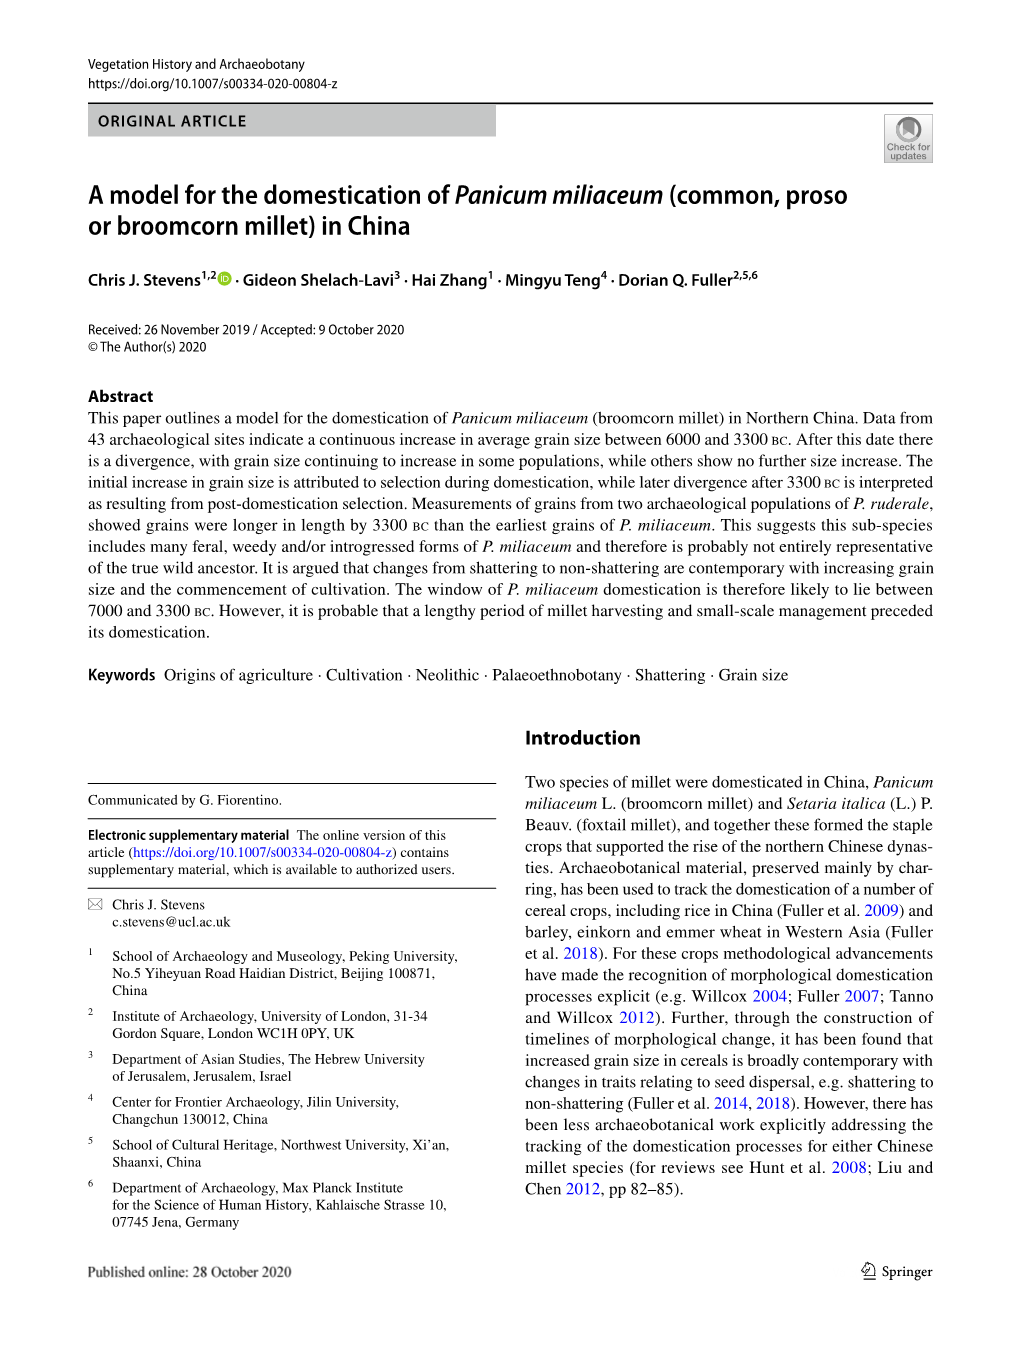 A Model for the Domestication of Panicum Miliaceum (Common, Proso Or Broomcorn Millet) in China